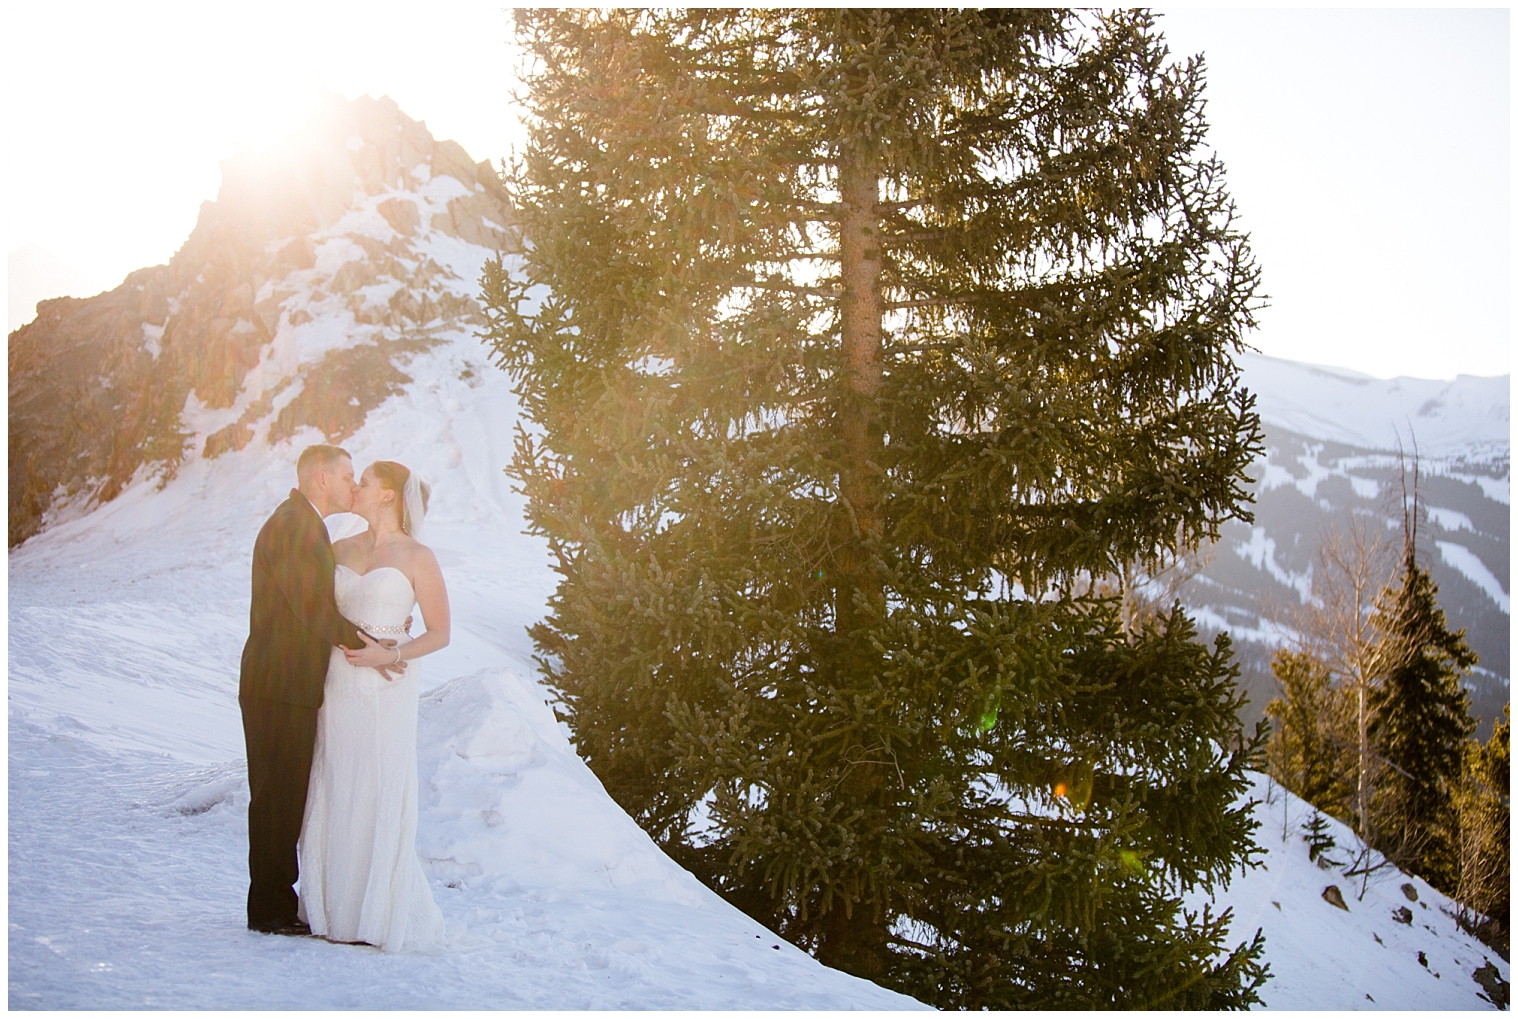 At their Breckenridge elopement, the bride and groom kiss in the mountains.